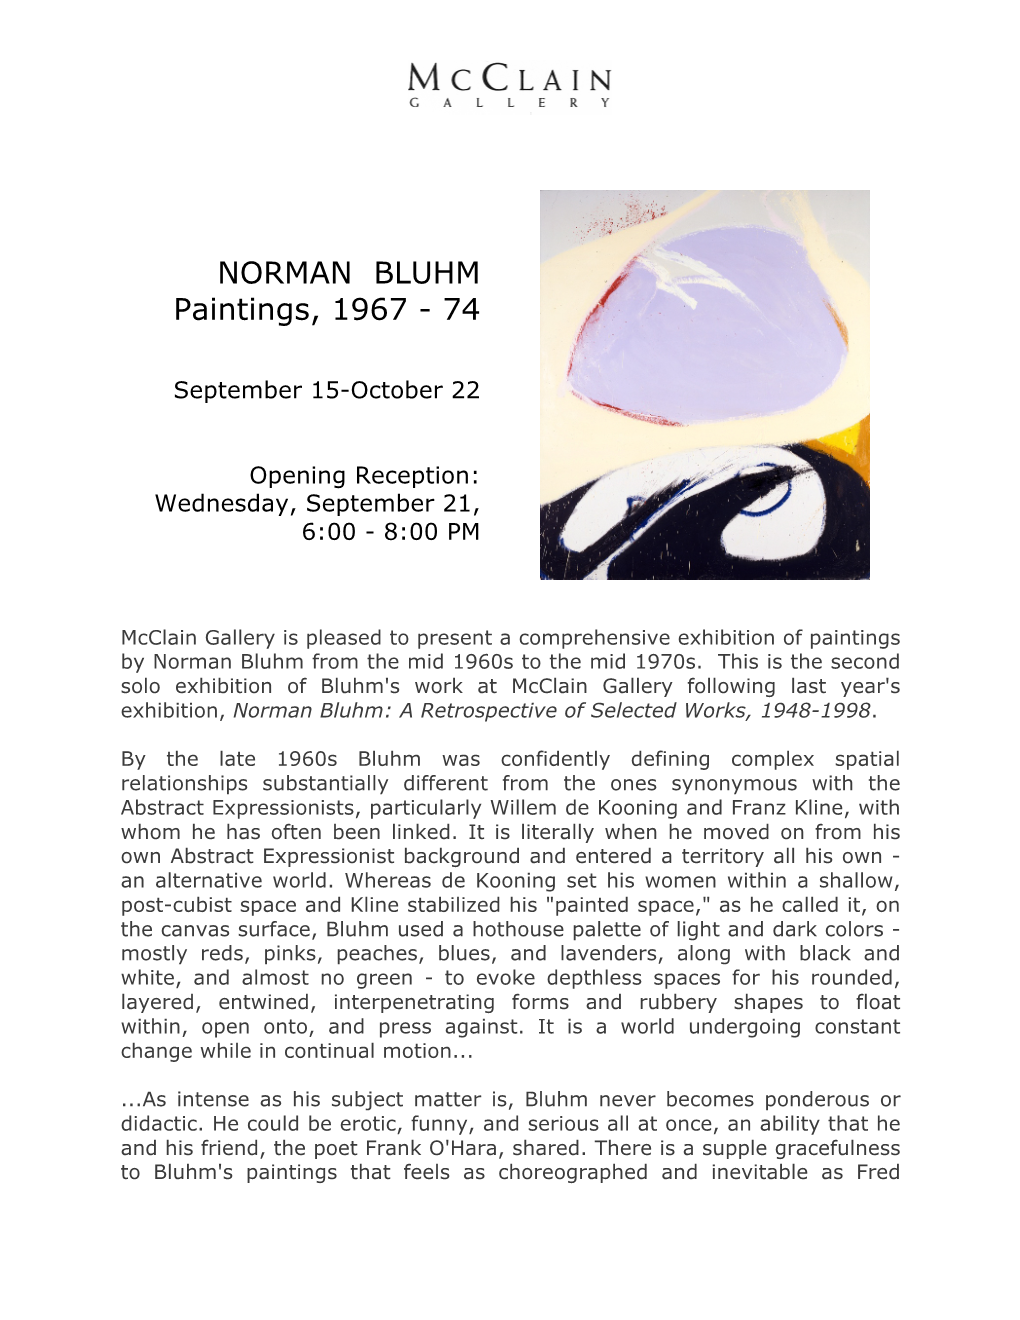 NORMAN BLUHM Email